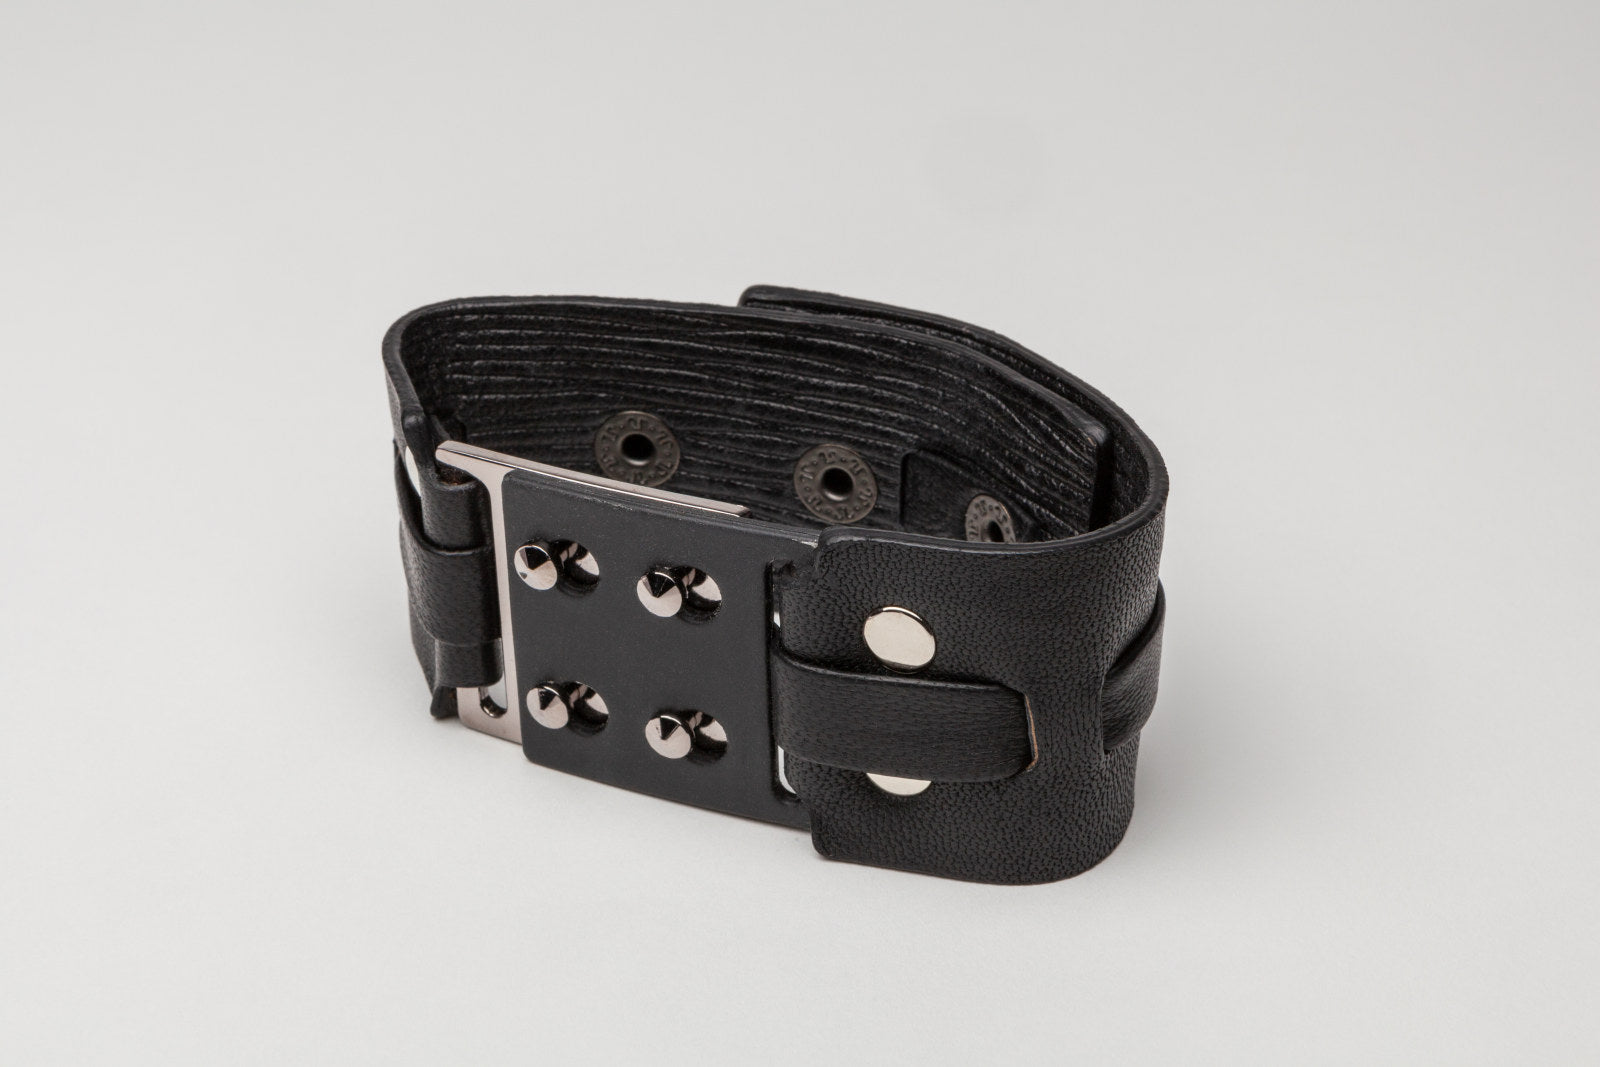 leather + metal cuff, with snap closure. 